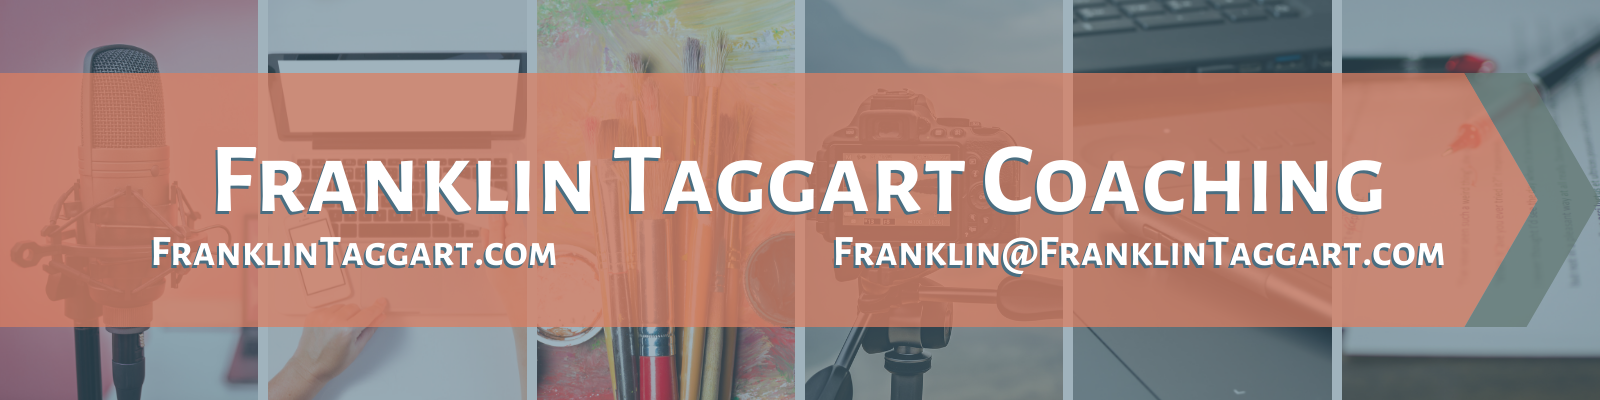 Franklin Taggart Coaching